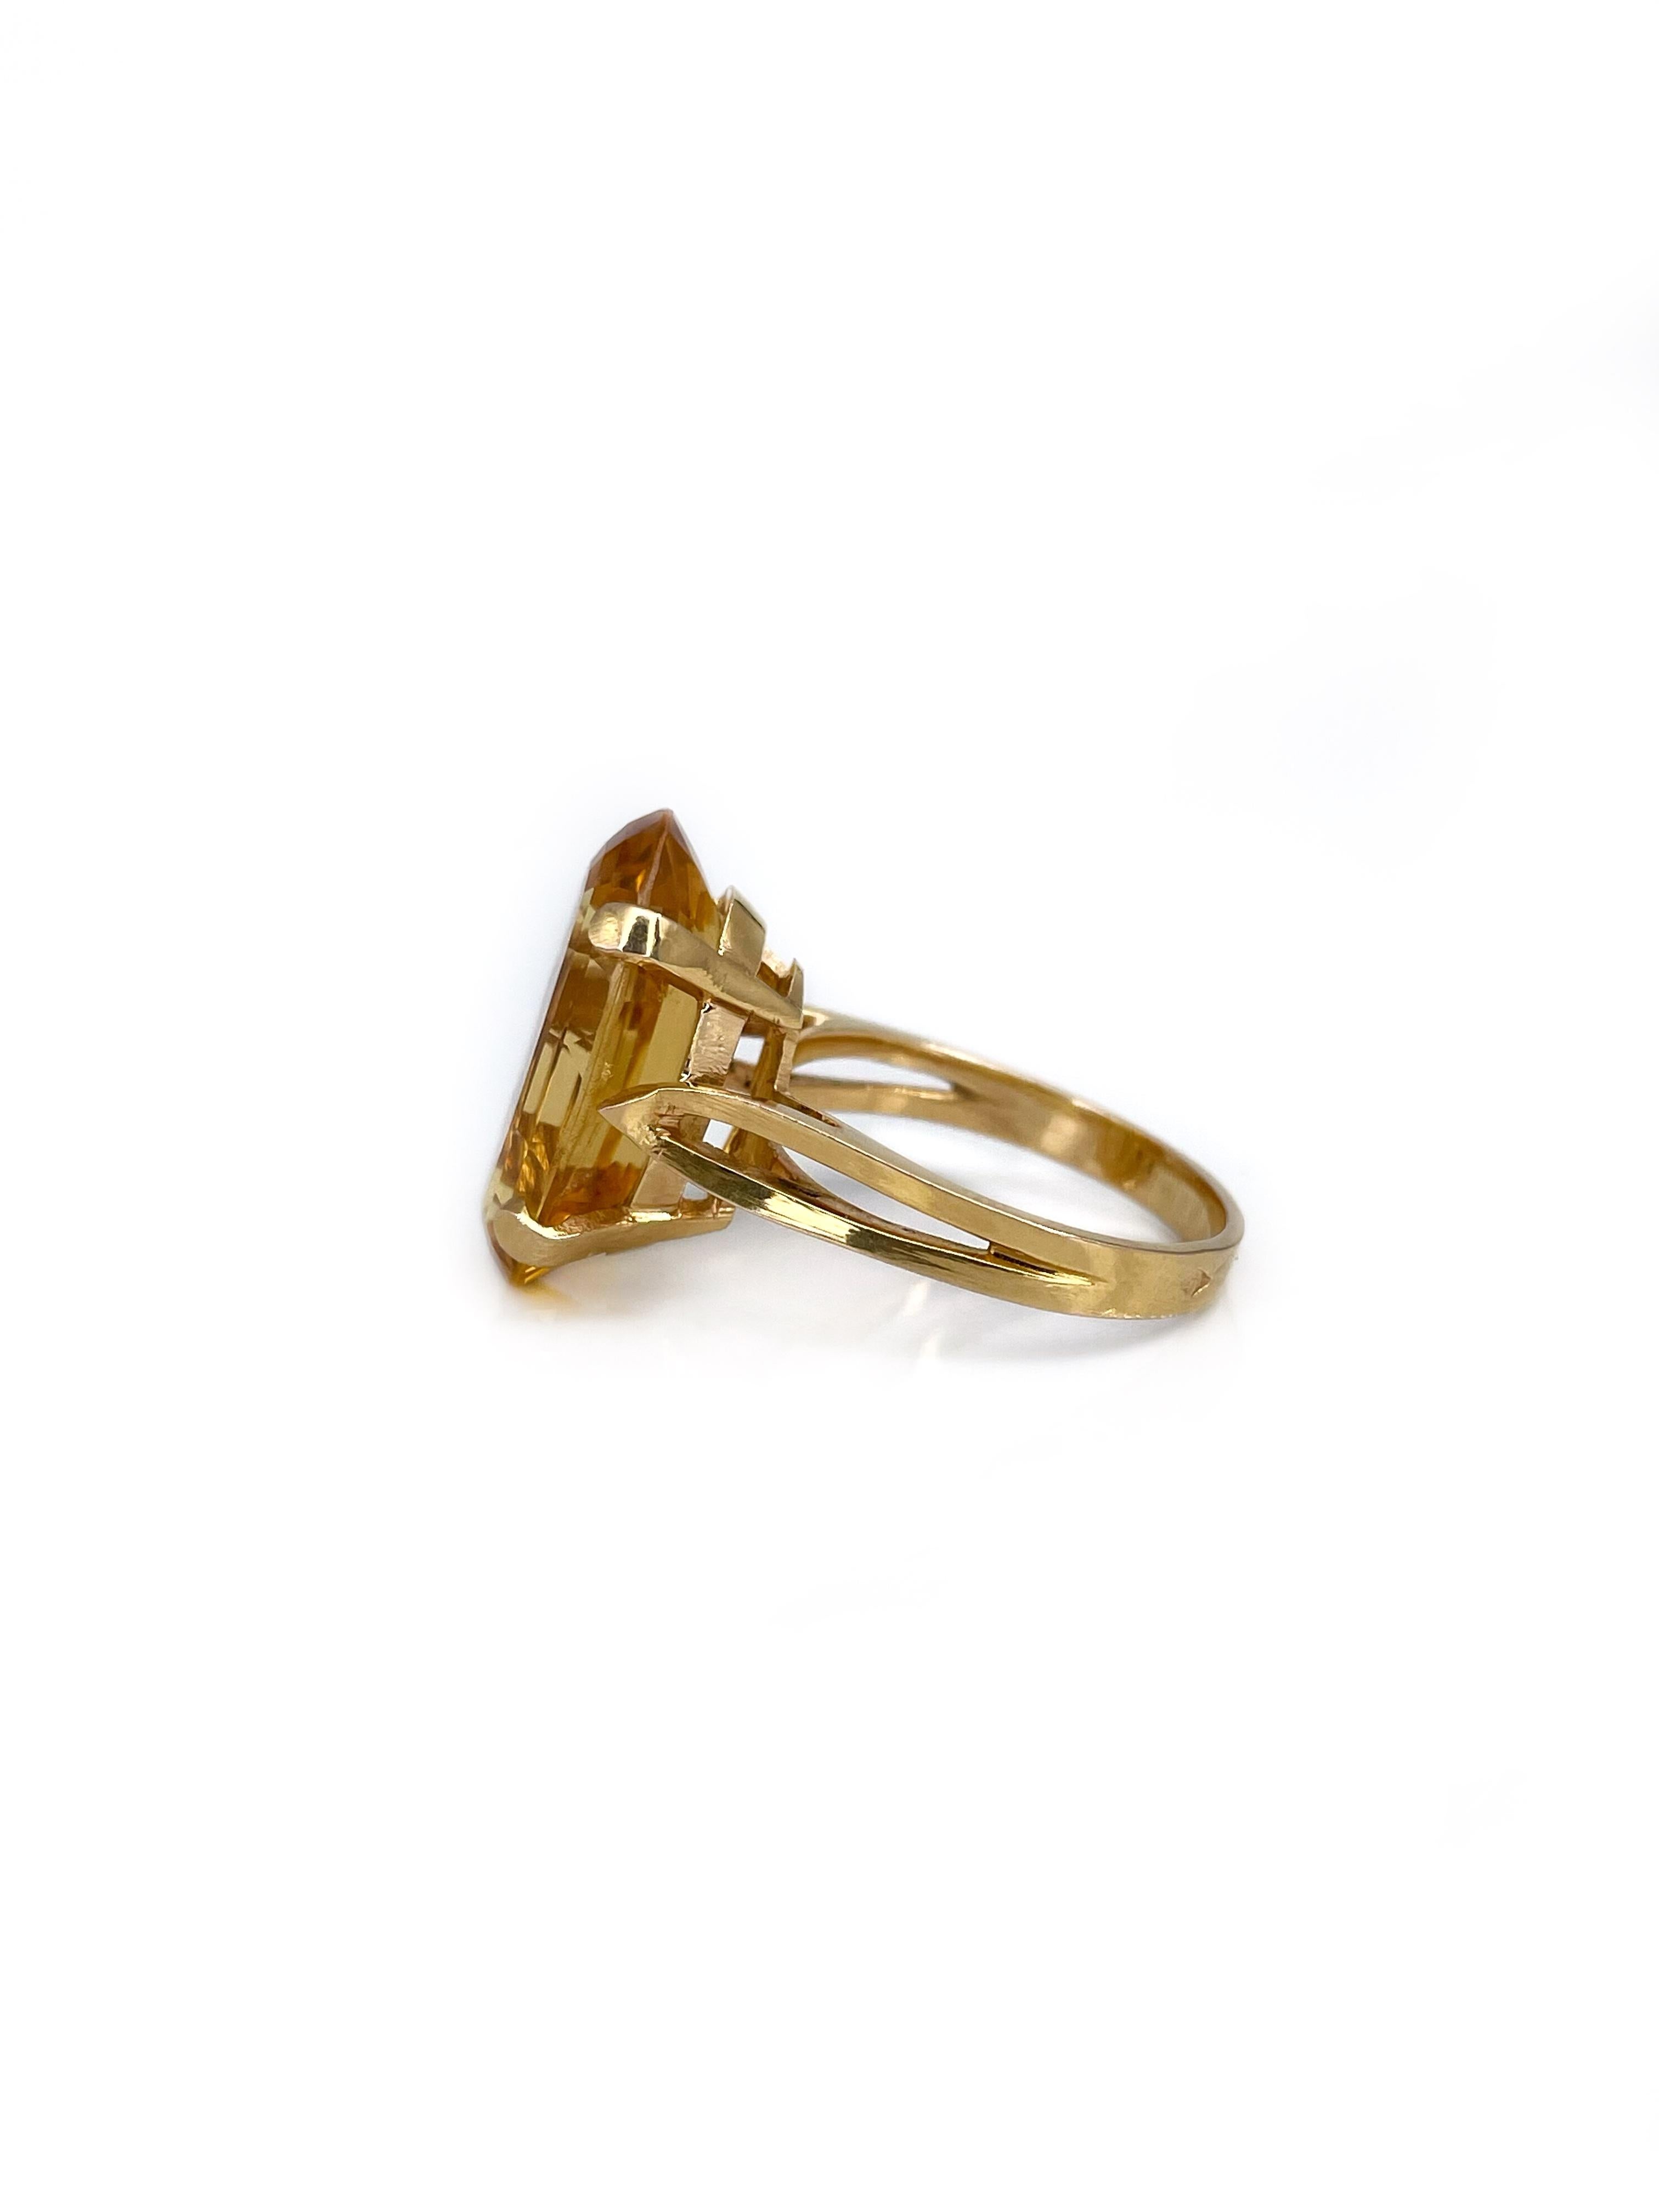 This is a gorgeous vintage cocktail ring crafted in 18K yellow gold. The piece features beautiful yellow oval faceted citrine. 

Weight: 5.86g
Size: 16.75 (US6.25)

IMPORTANT: please ask about the possibility to resize before purchase. This process